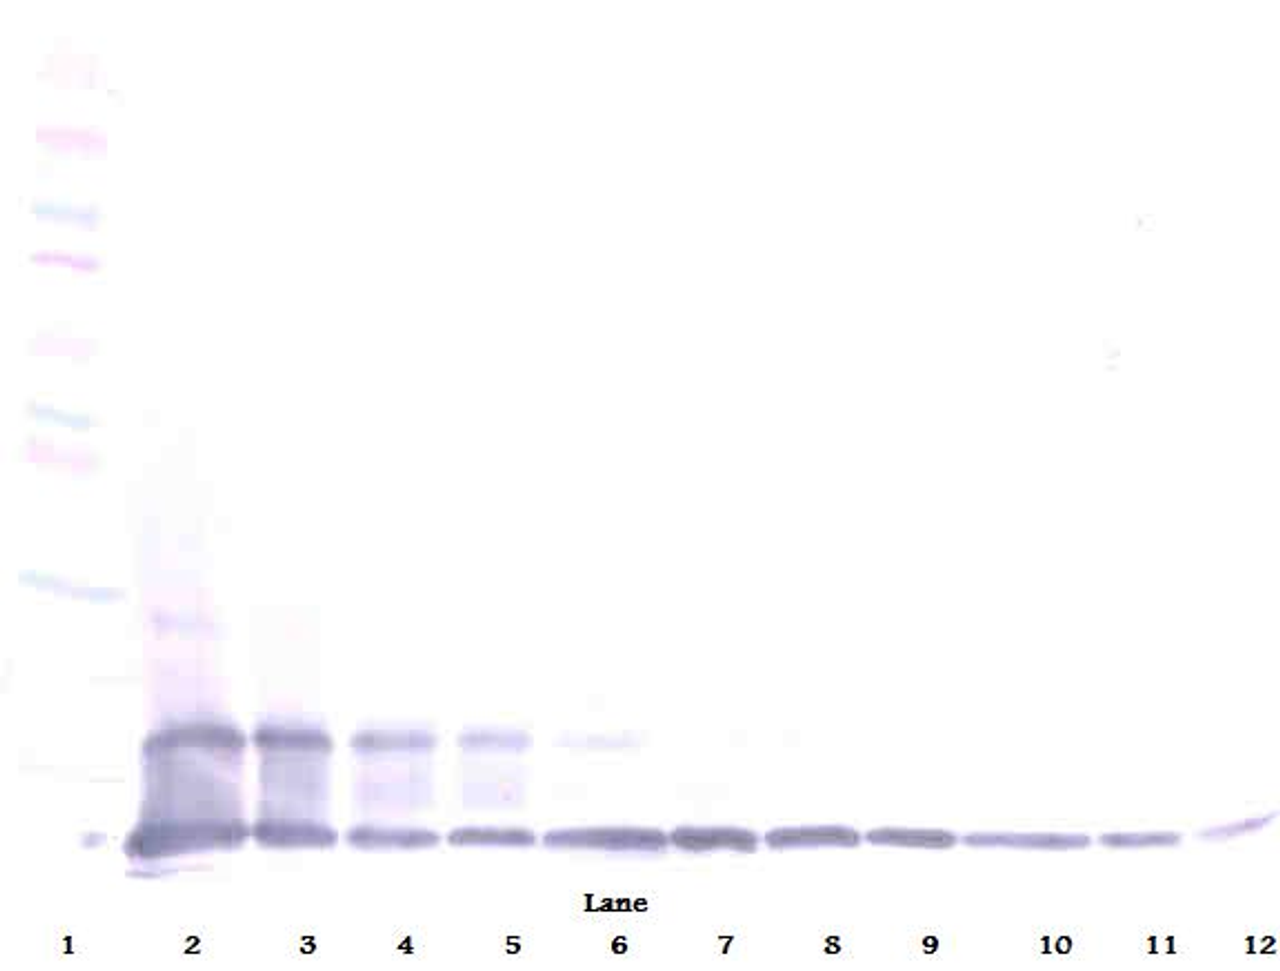 To detect hFractalkine by Western Blot analysis this antibody can be used at a concentration of 0.1-0.2 ug/ml. Used in conjunction with compatible secondary reagents the detection limit for recombinant hFractalkine is 1.5-3.0 ng/lane, under either reducing or non-reducing conditions.